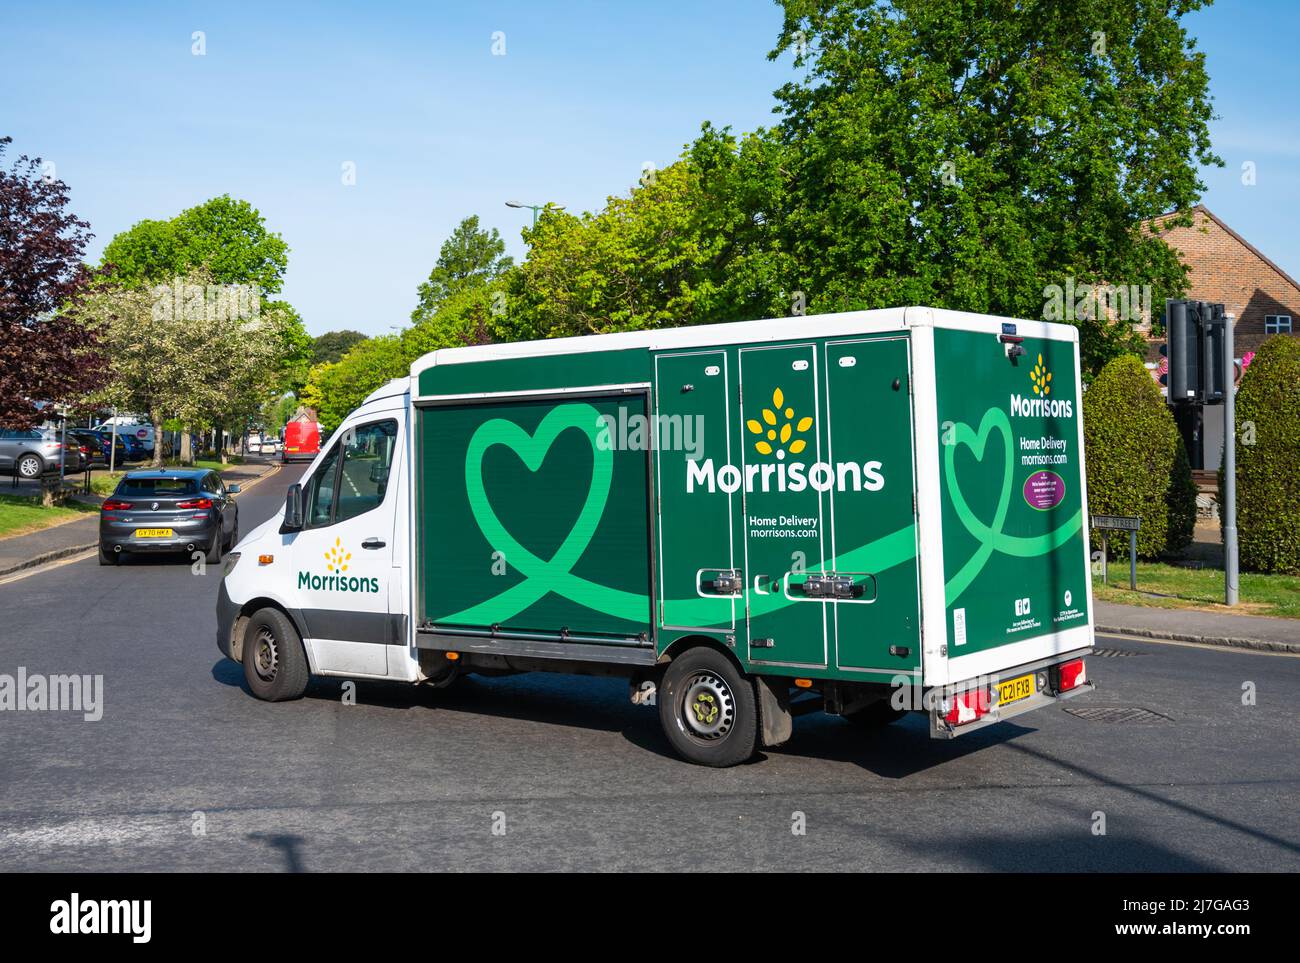 Food or groceries delivery van for the Morrisons grocery store on route to deliver groceries to online customers in West Sussex, England, UK. Stock Photo